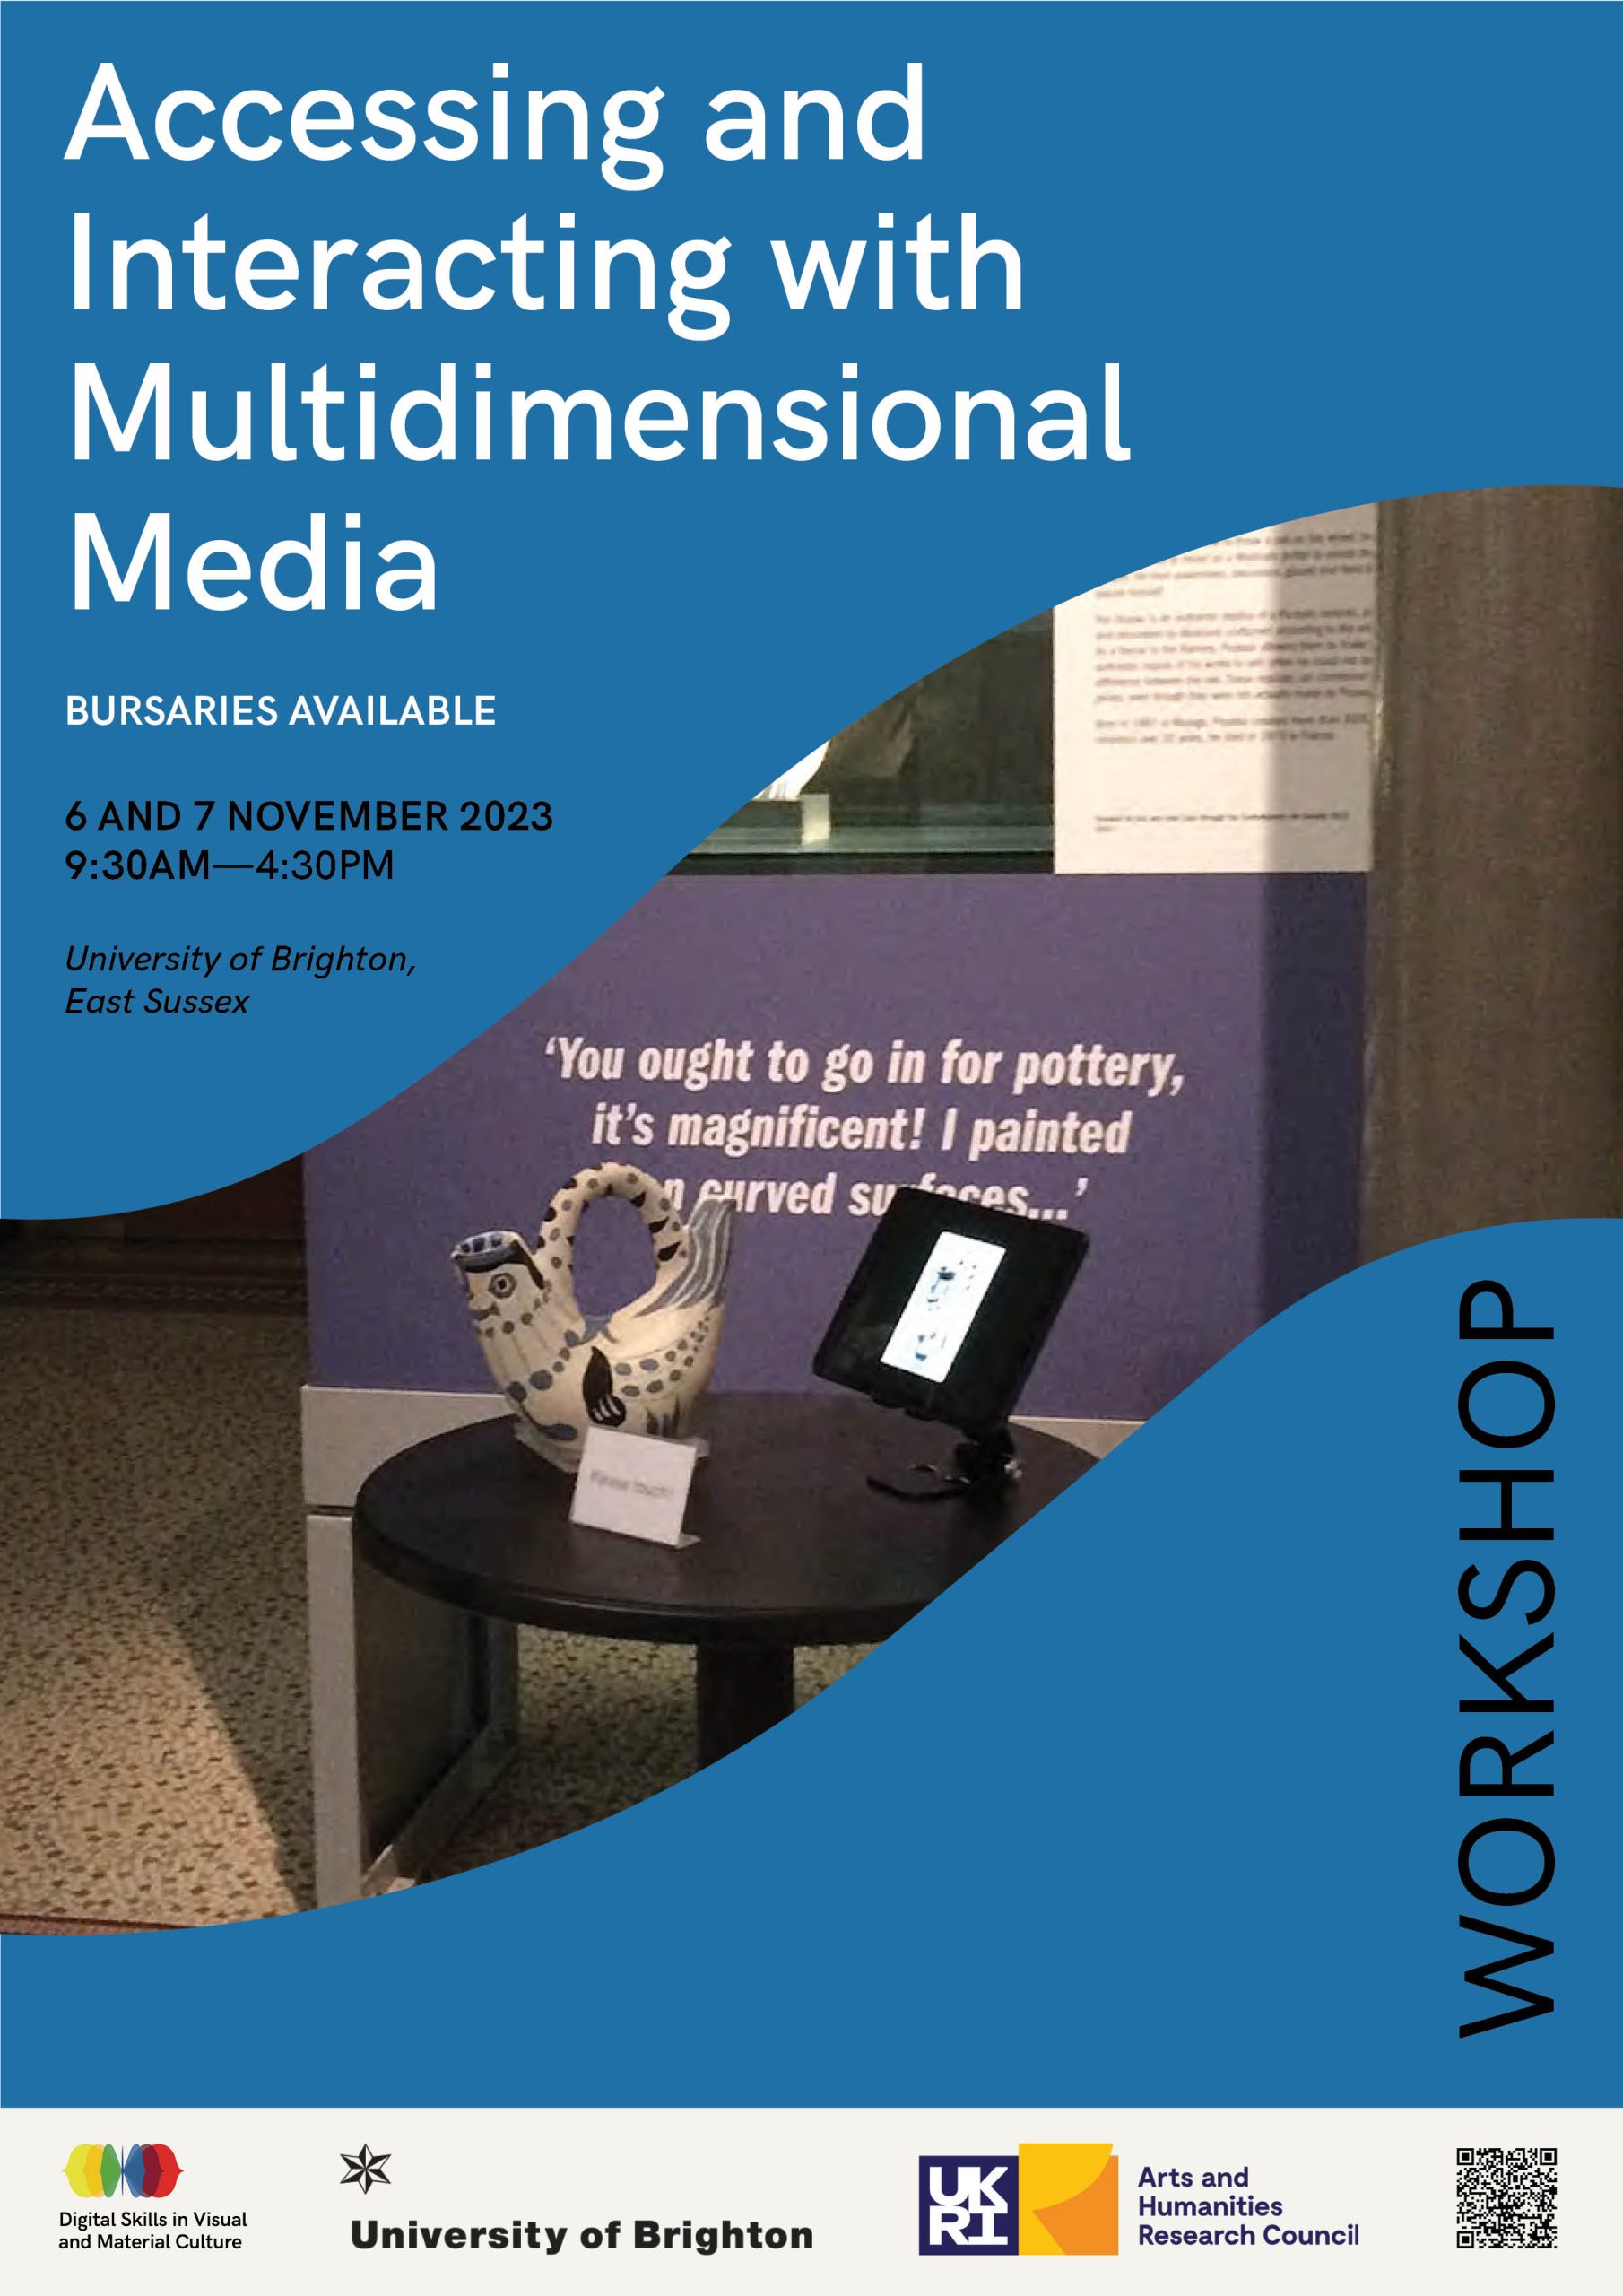 Workshop: Accessing and Interacting with Multidimensional Media